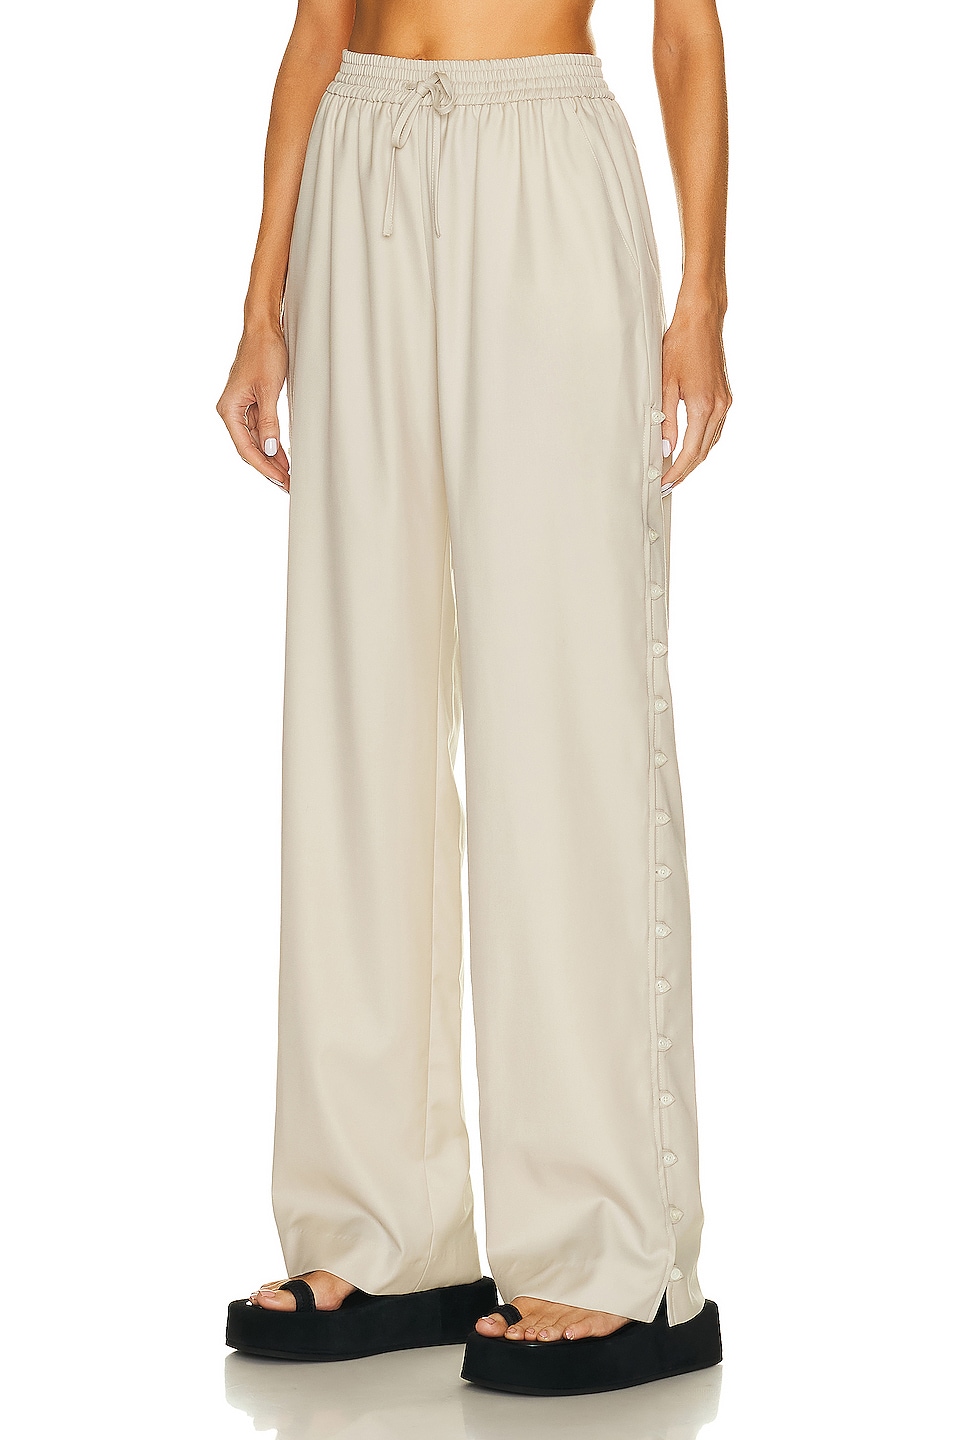 Image 1 of Loulou Studio Checa Wide Leg Pant in Beige